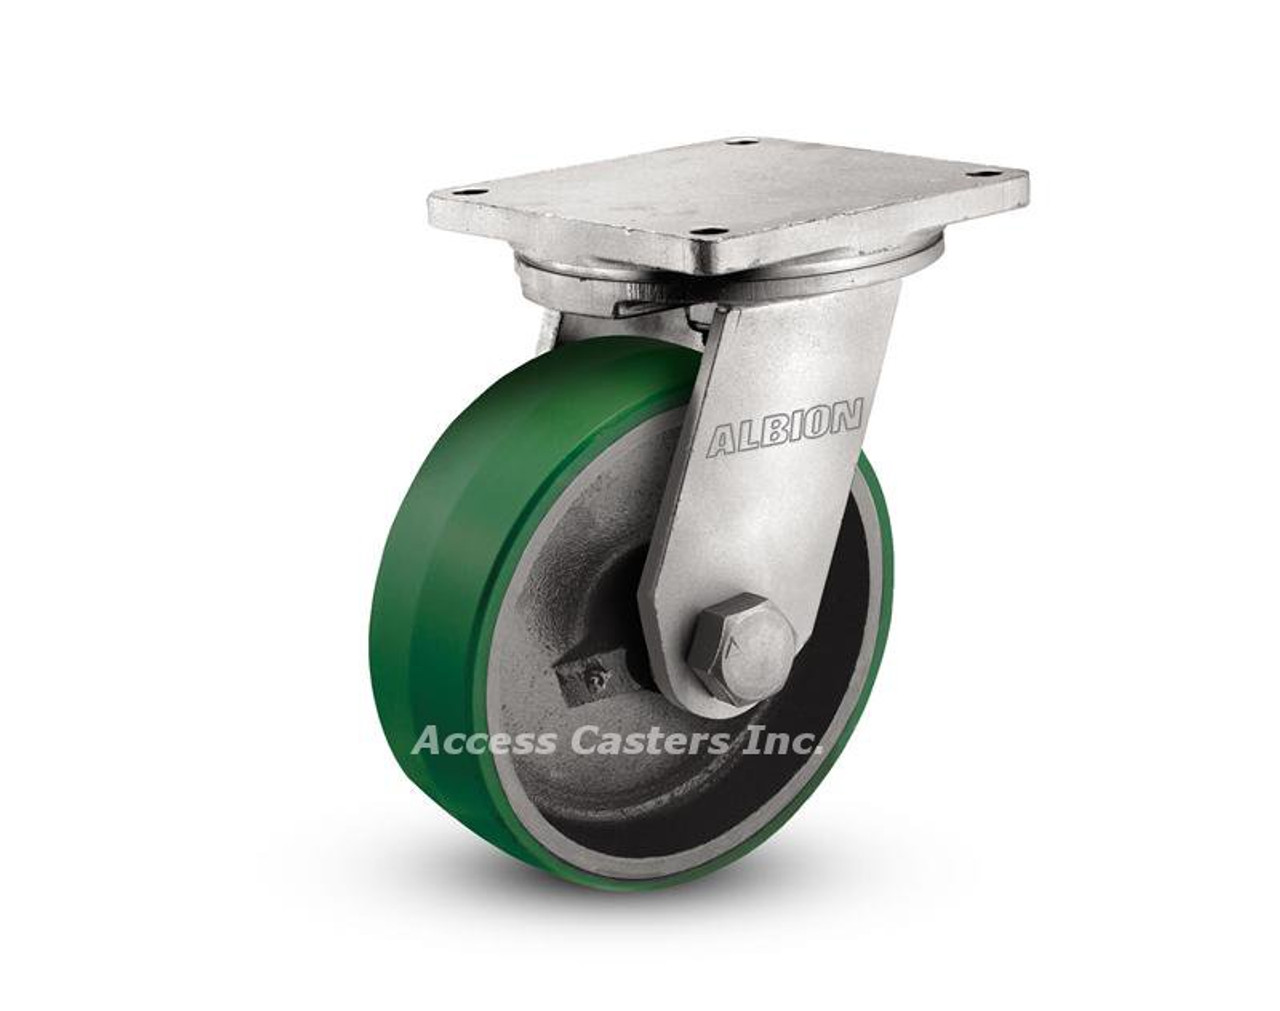 Picture shows caster with 10 Inch x 3 Inch wheel.